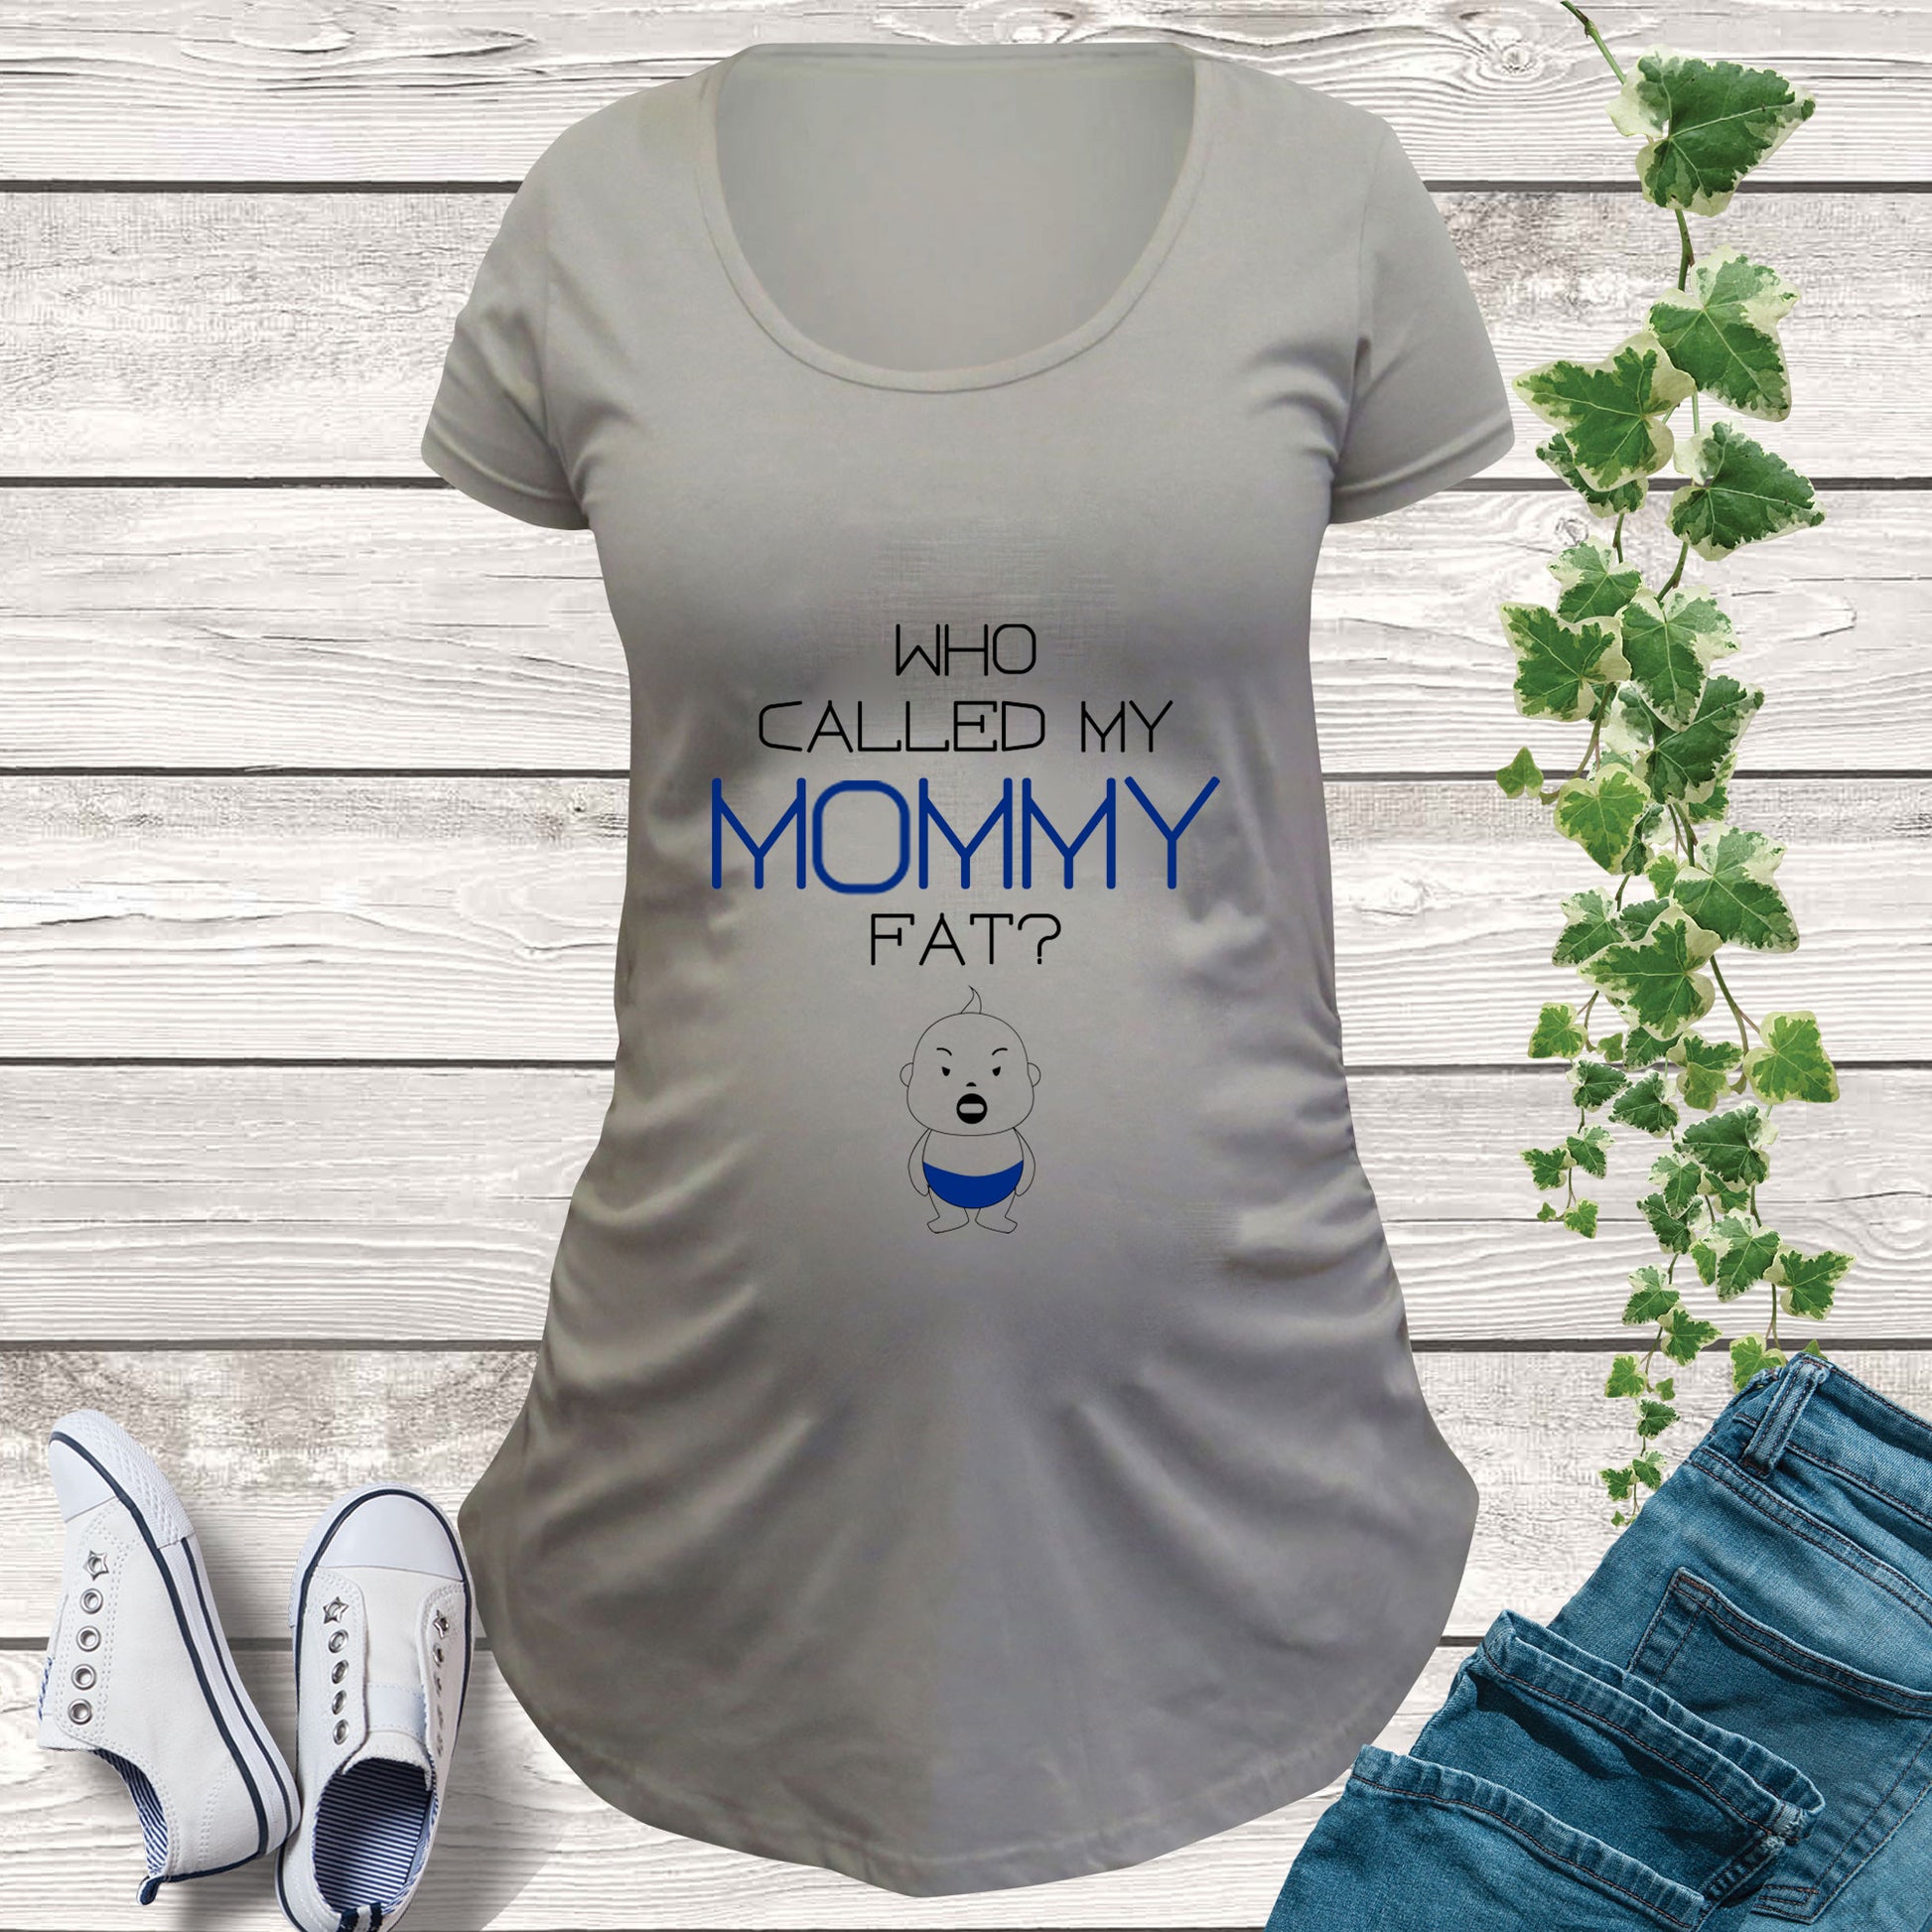 Who call my Mommy Fat Pregnancy T Shirt